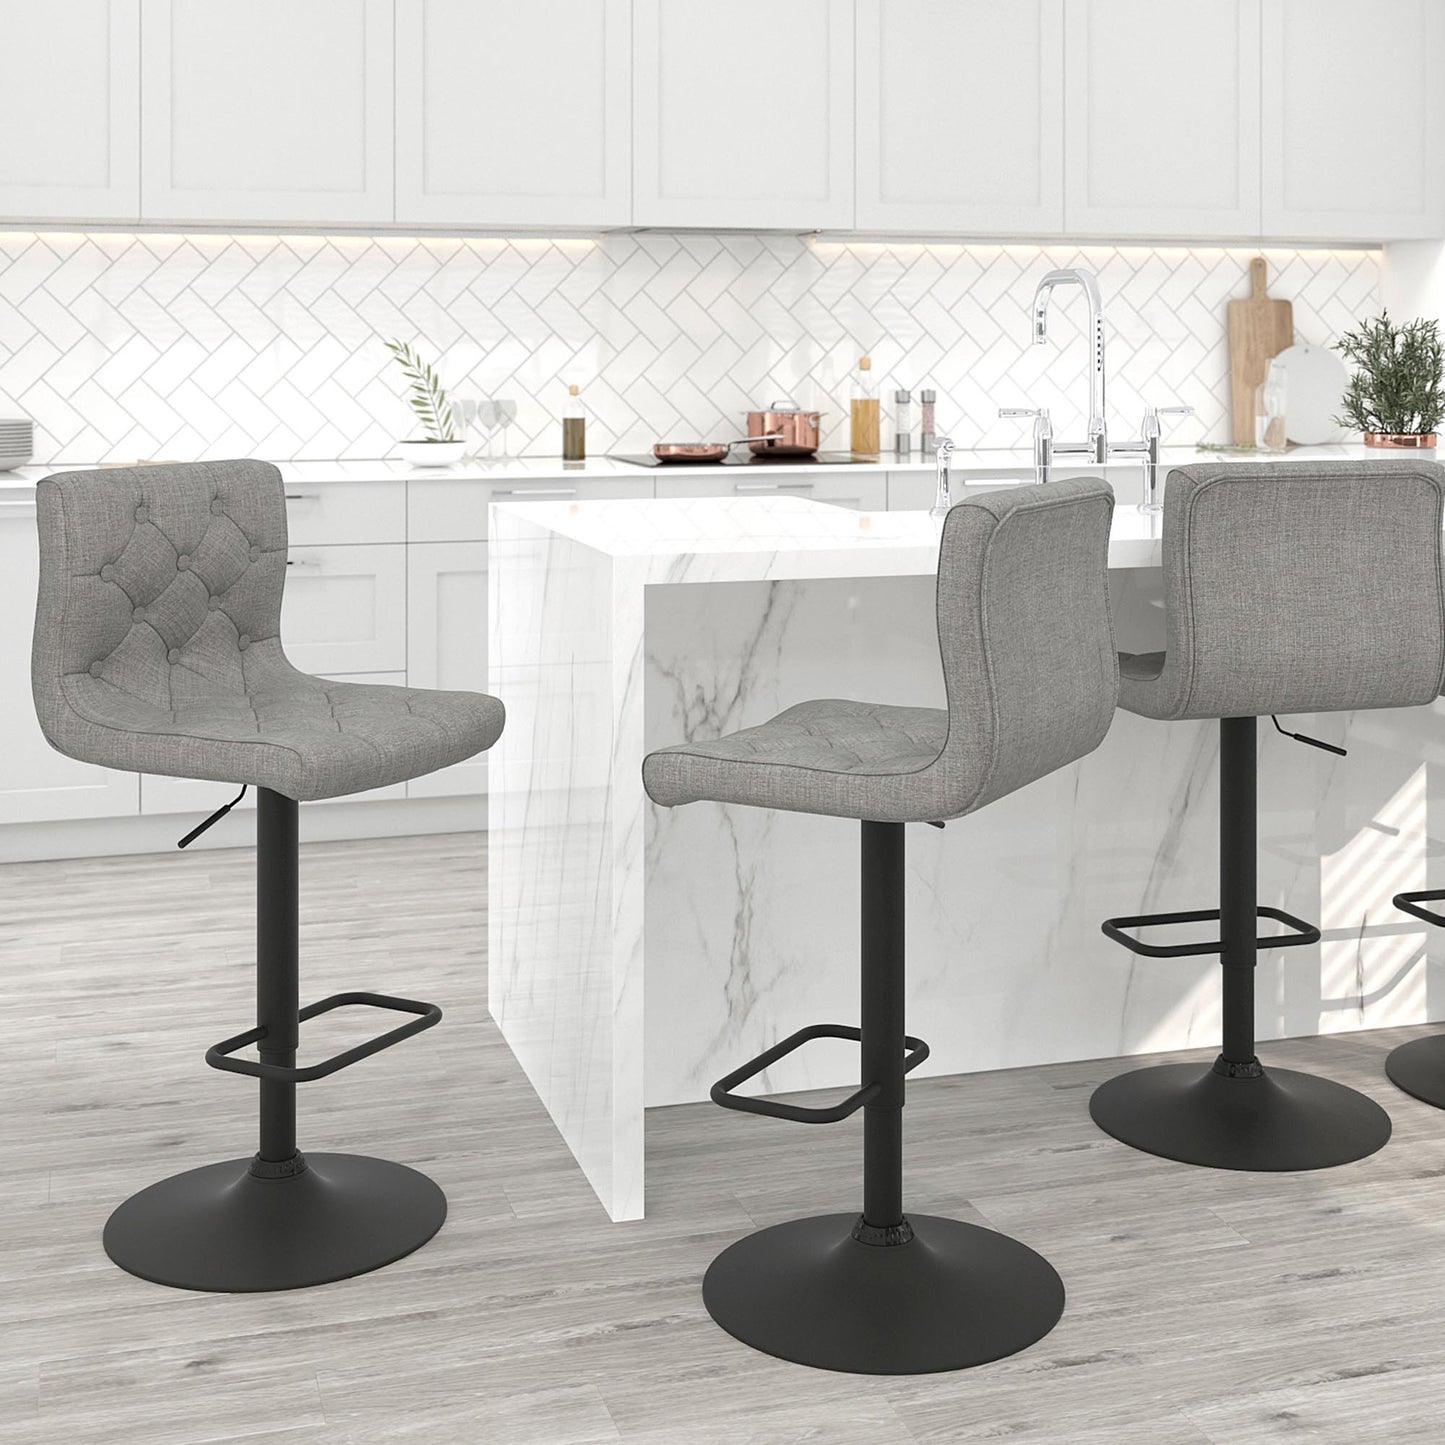 Dex Adjustable Air Lift Stool, Set of 2 in Grey and Black